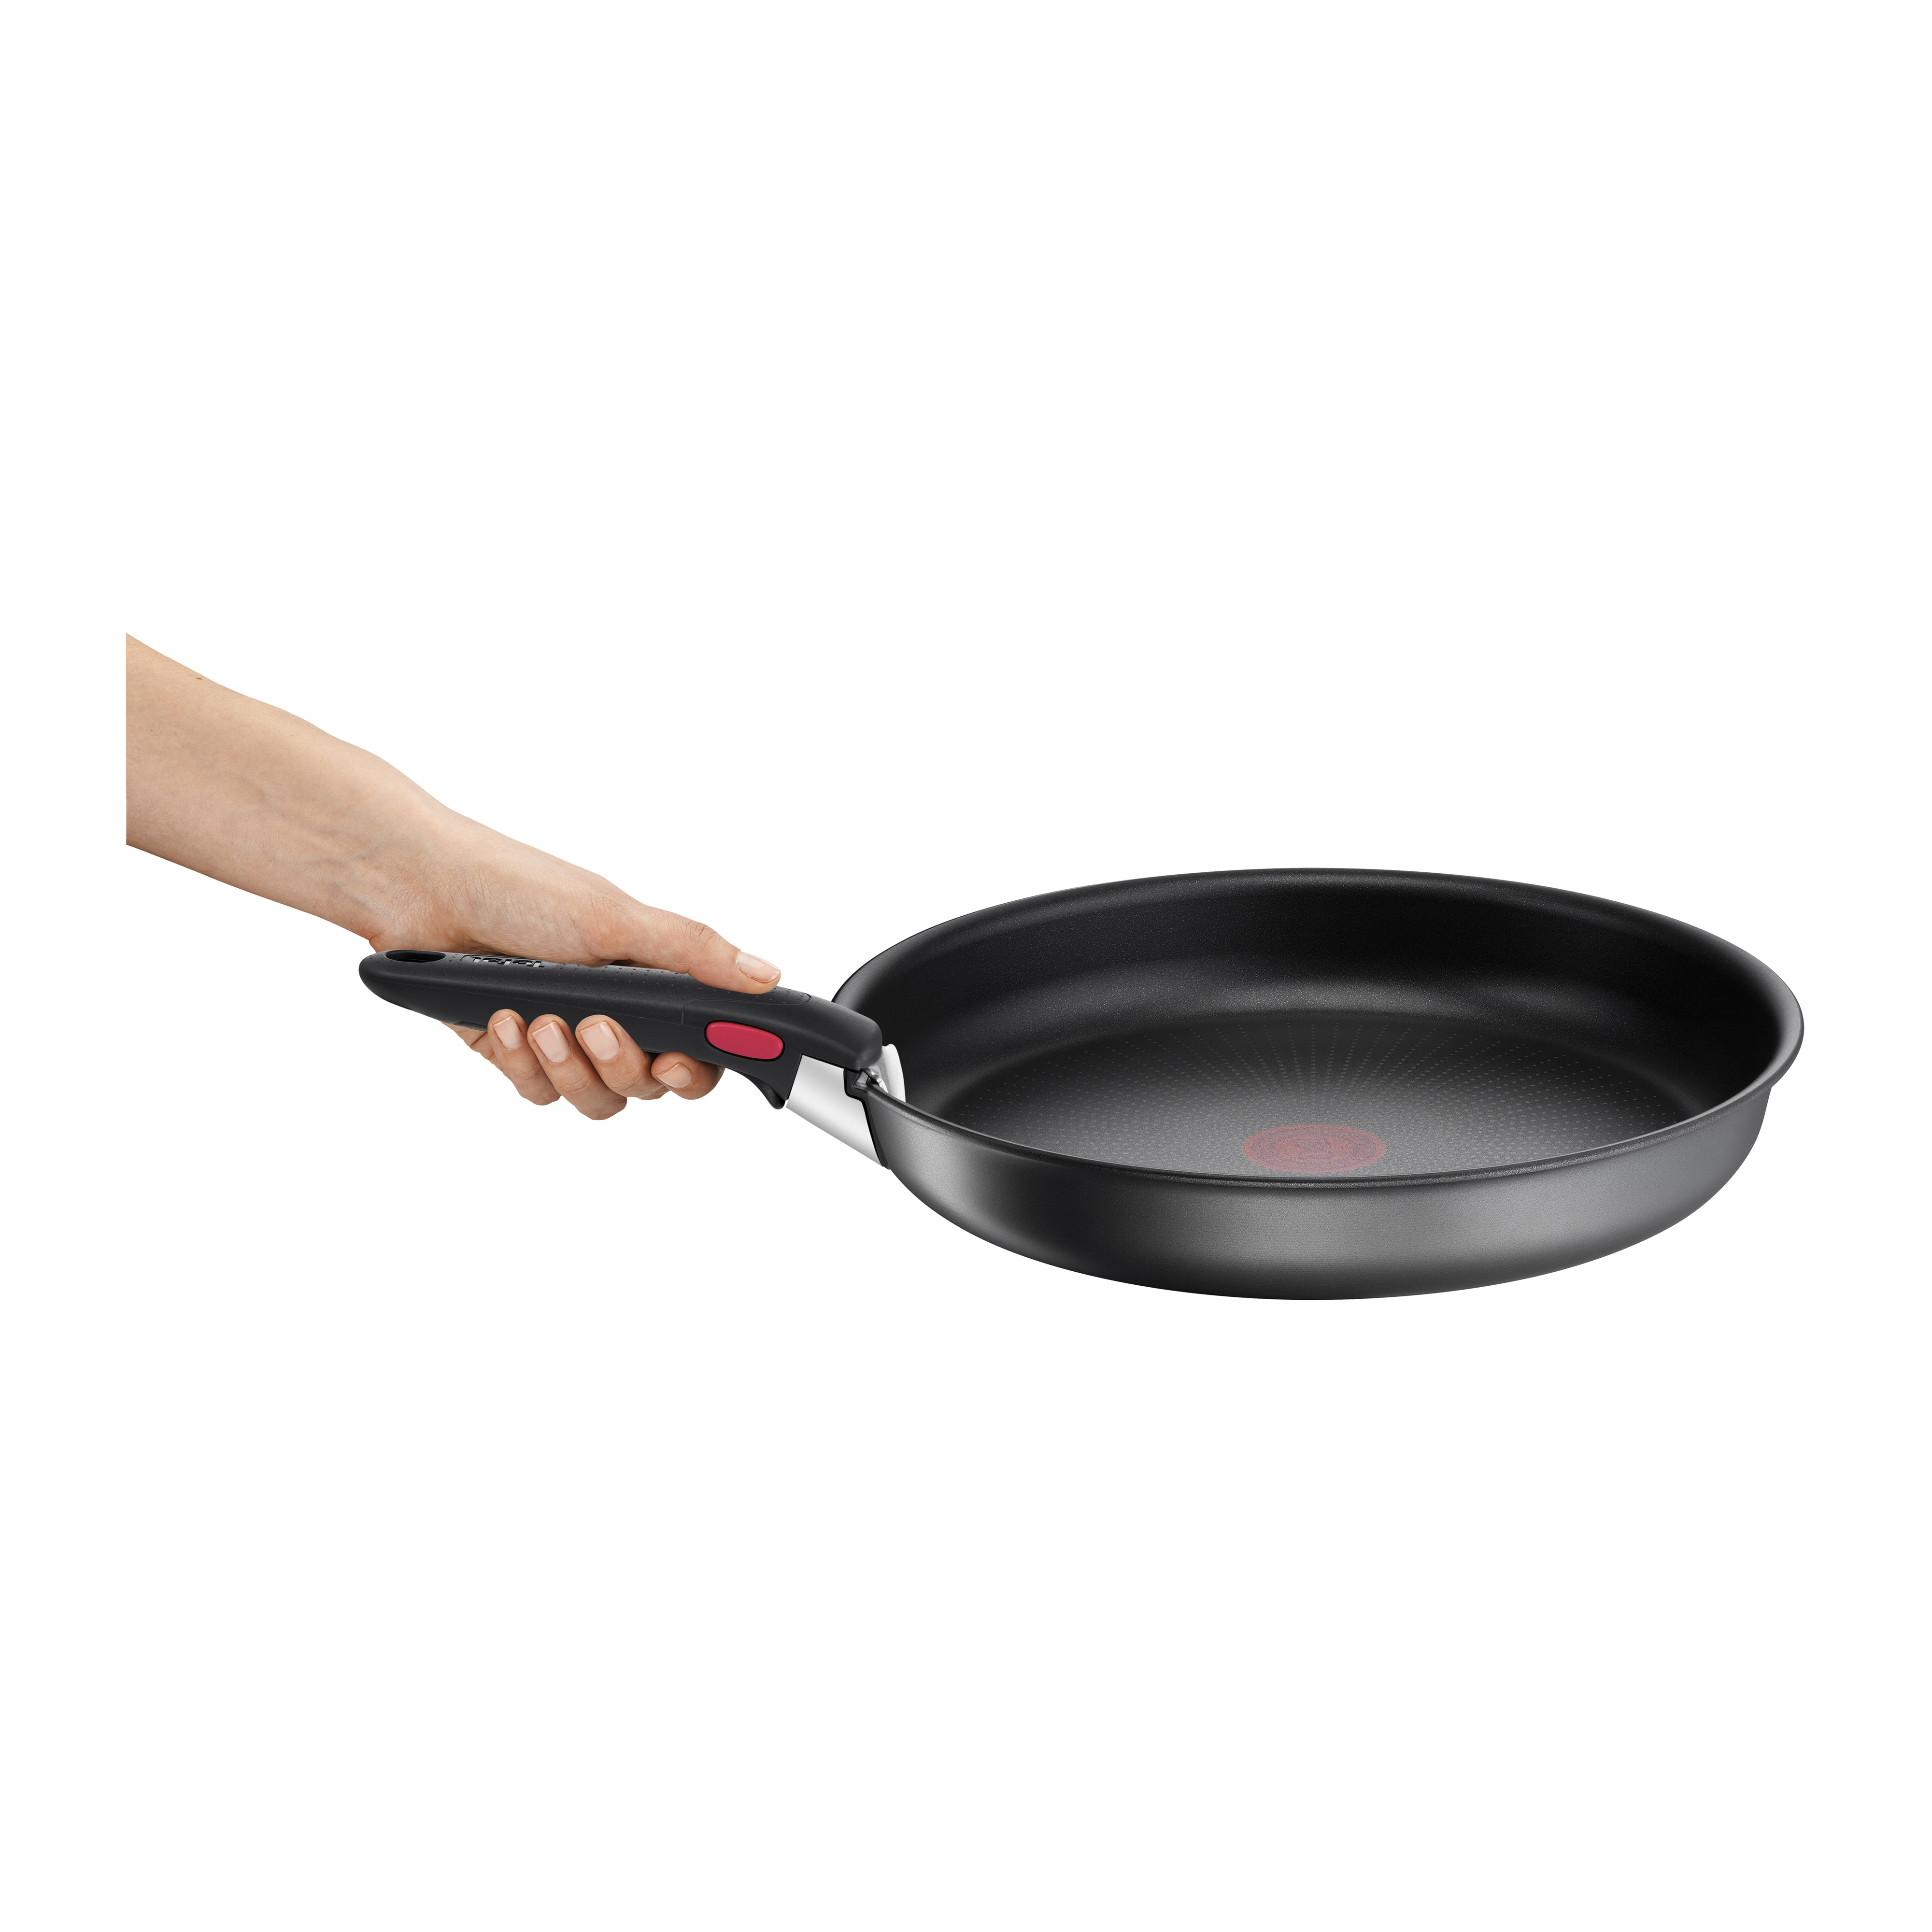 Noel Grimley Electrics - Tefal 20cm Intuition Frying Pan A7030224